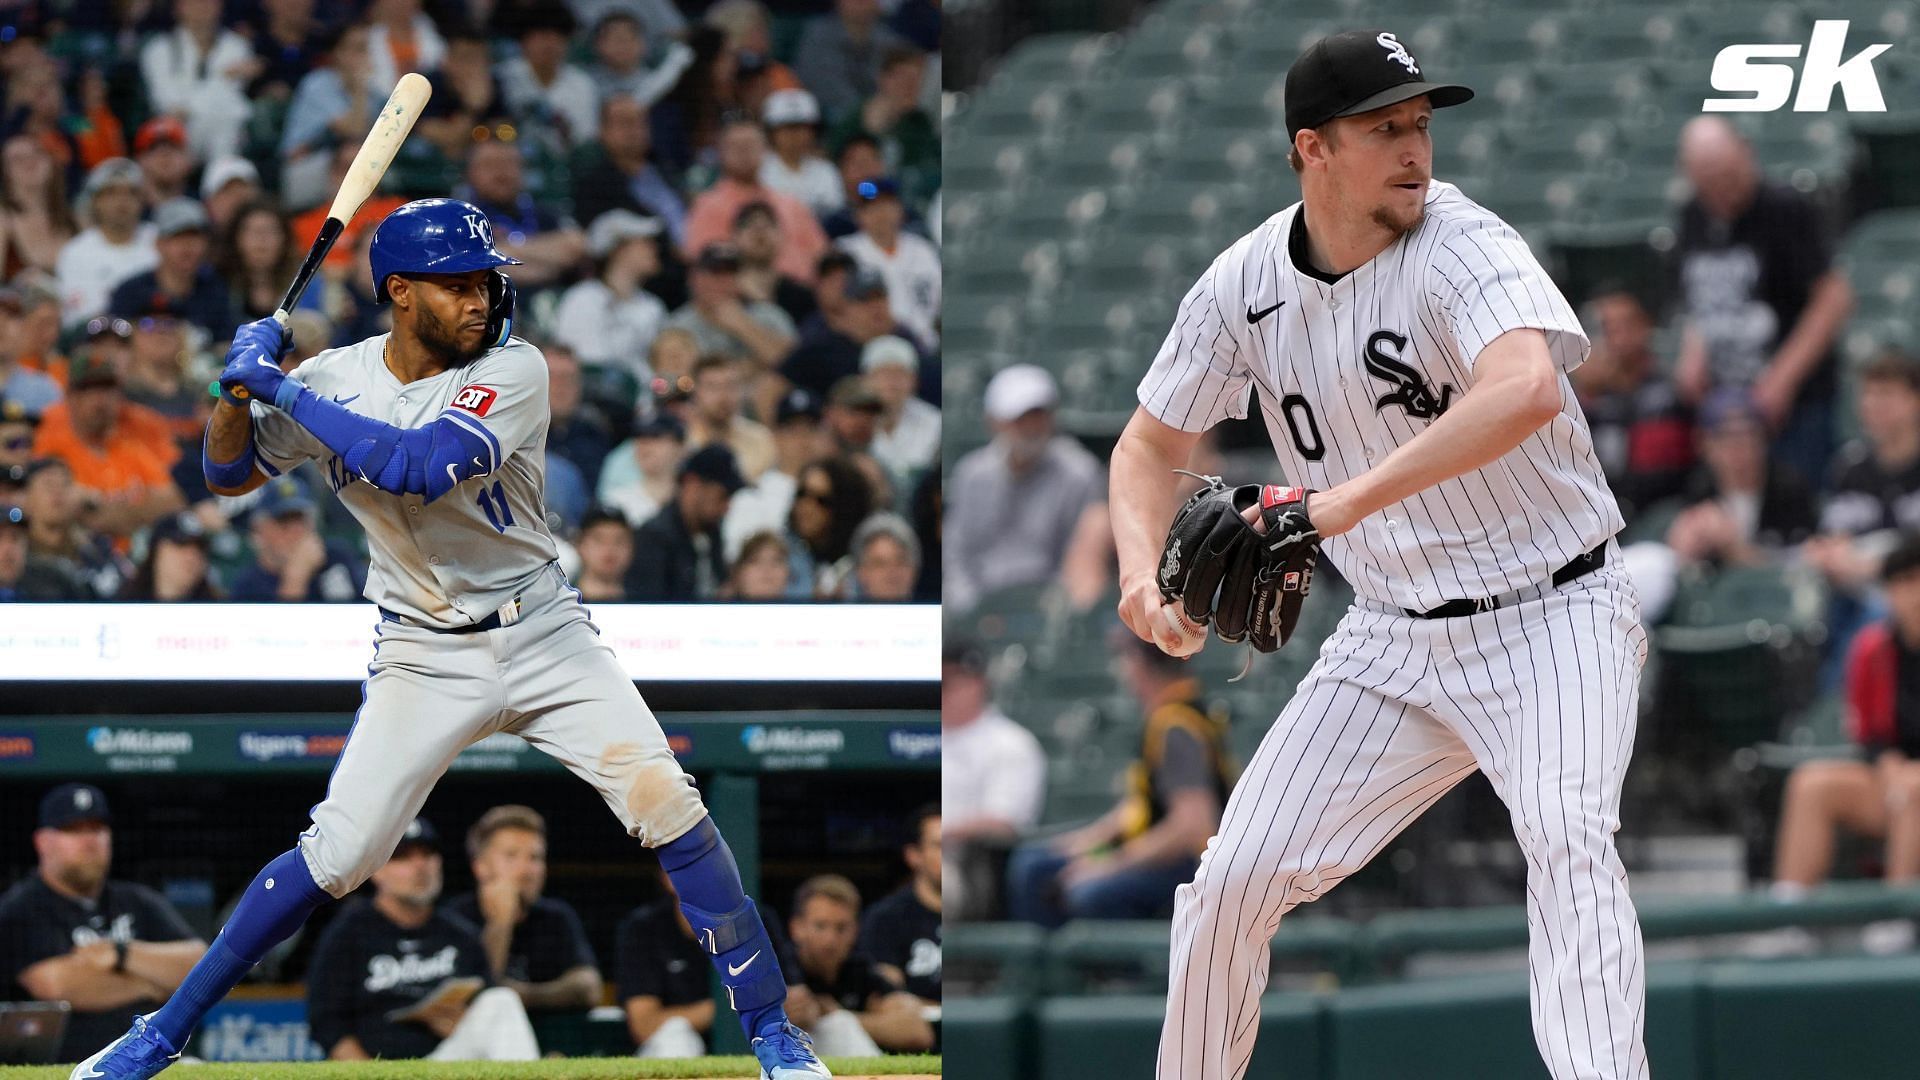 Maikel Garcia and Erick Fedde are two must-add players in fantasy baseball leagues